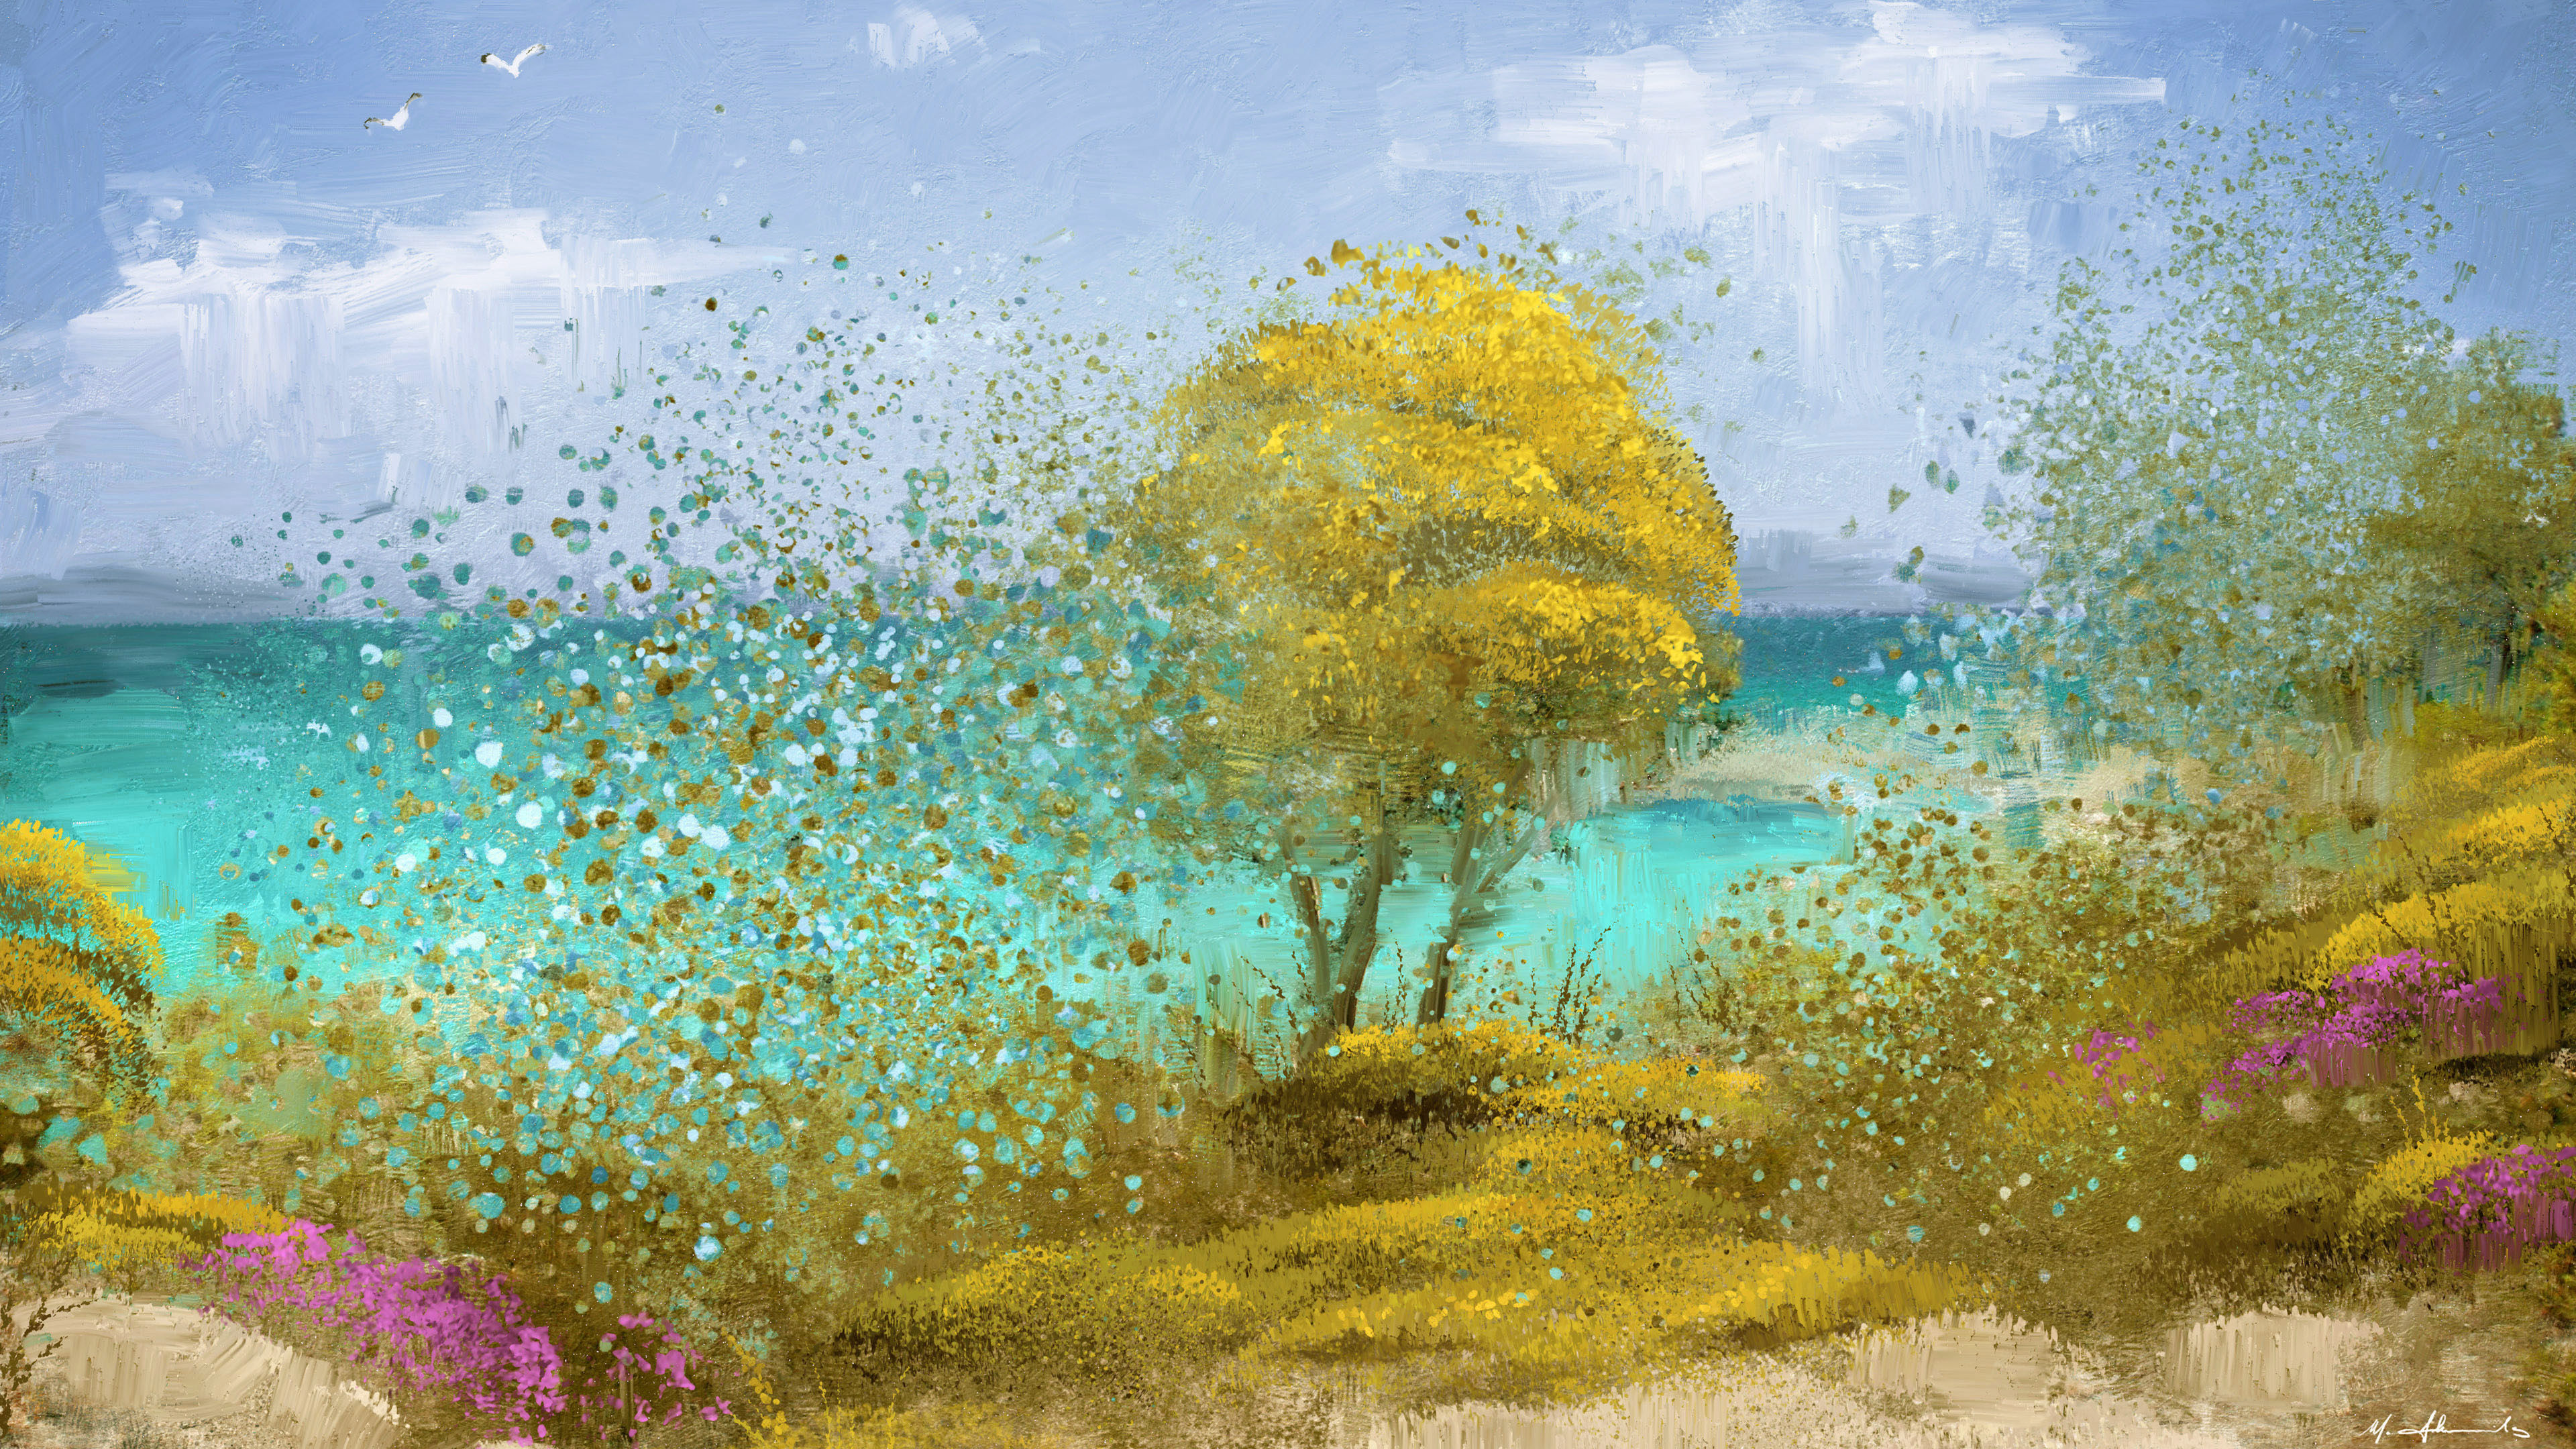 Concept Art and Photohop Brushes of a Greek Beach